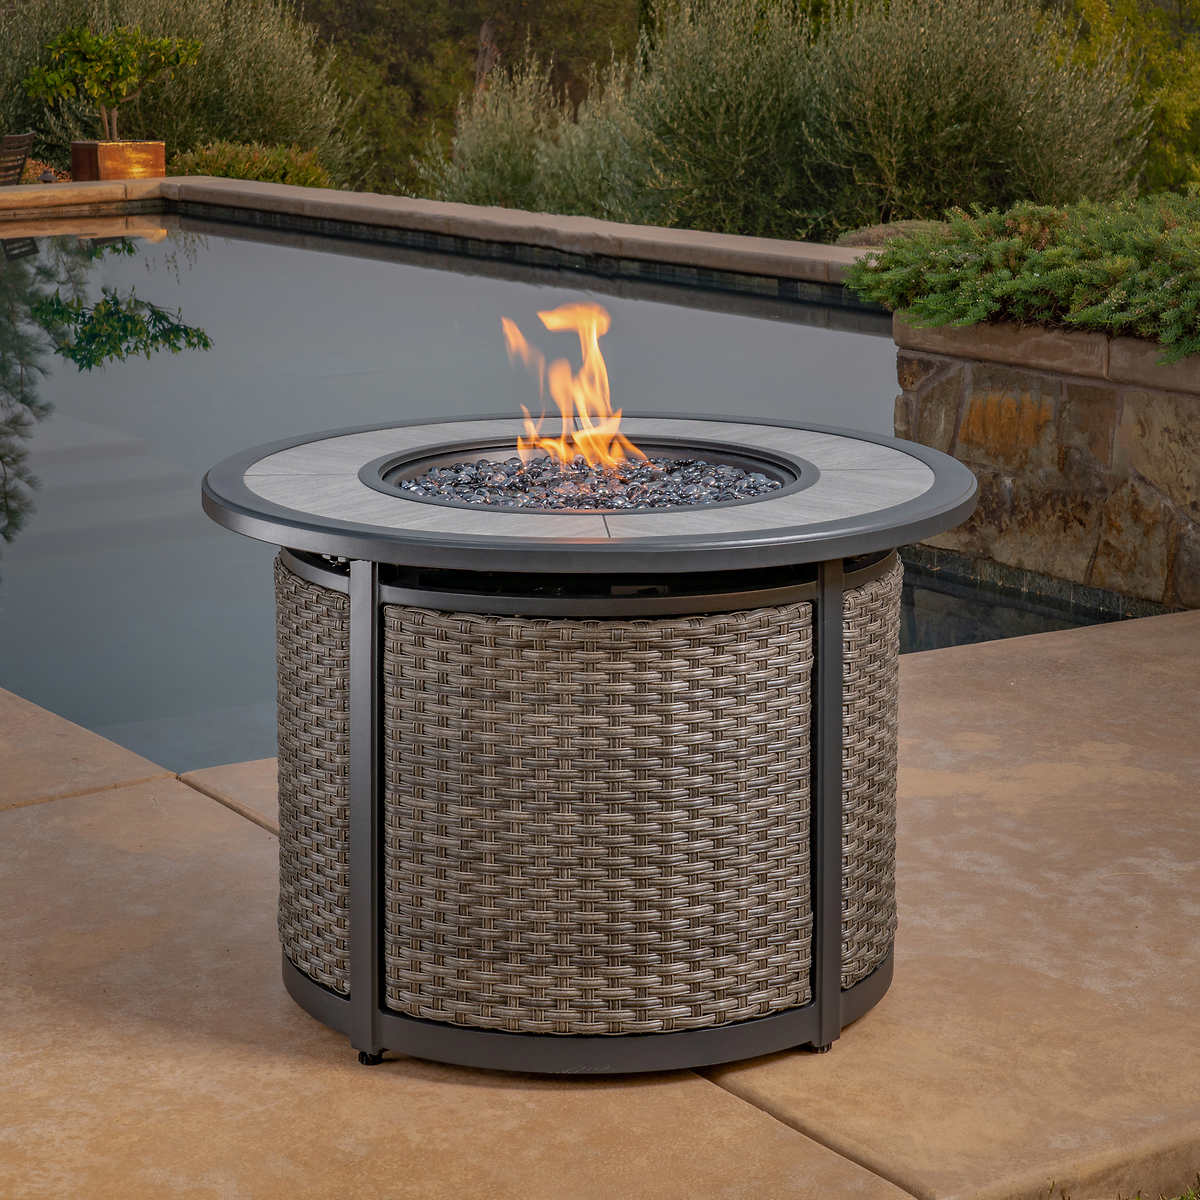 Madison Fire Pit Table Costco, Washer Tub Fire Pit Standard